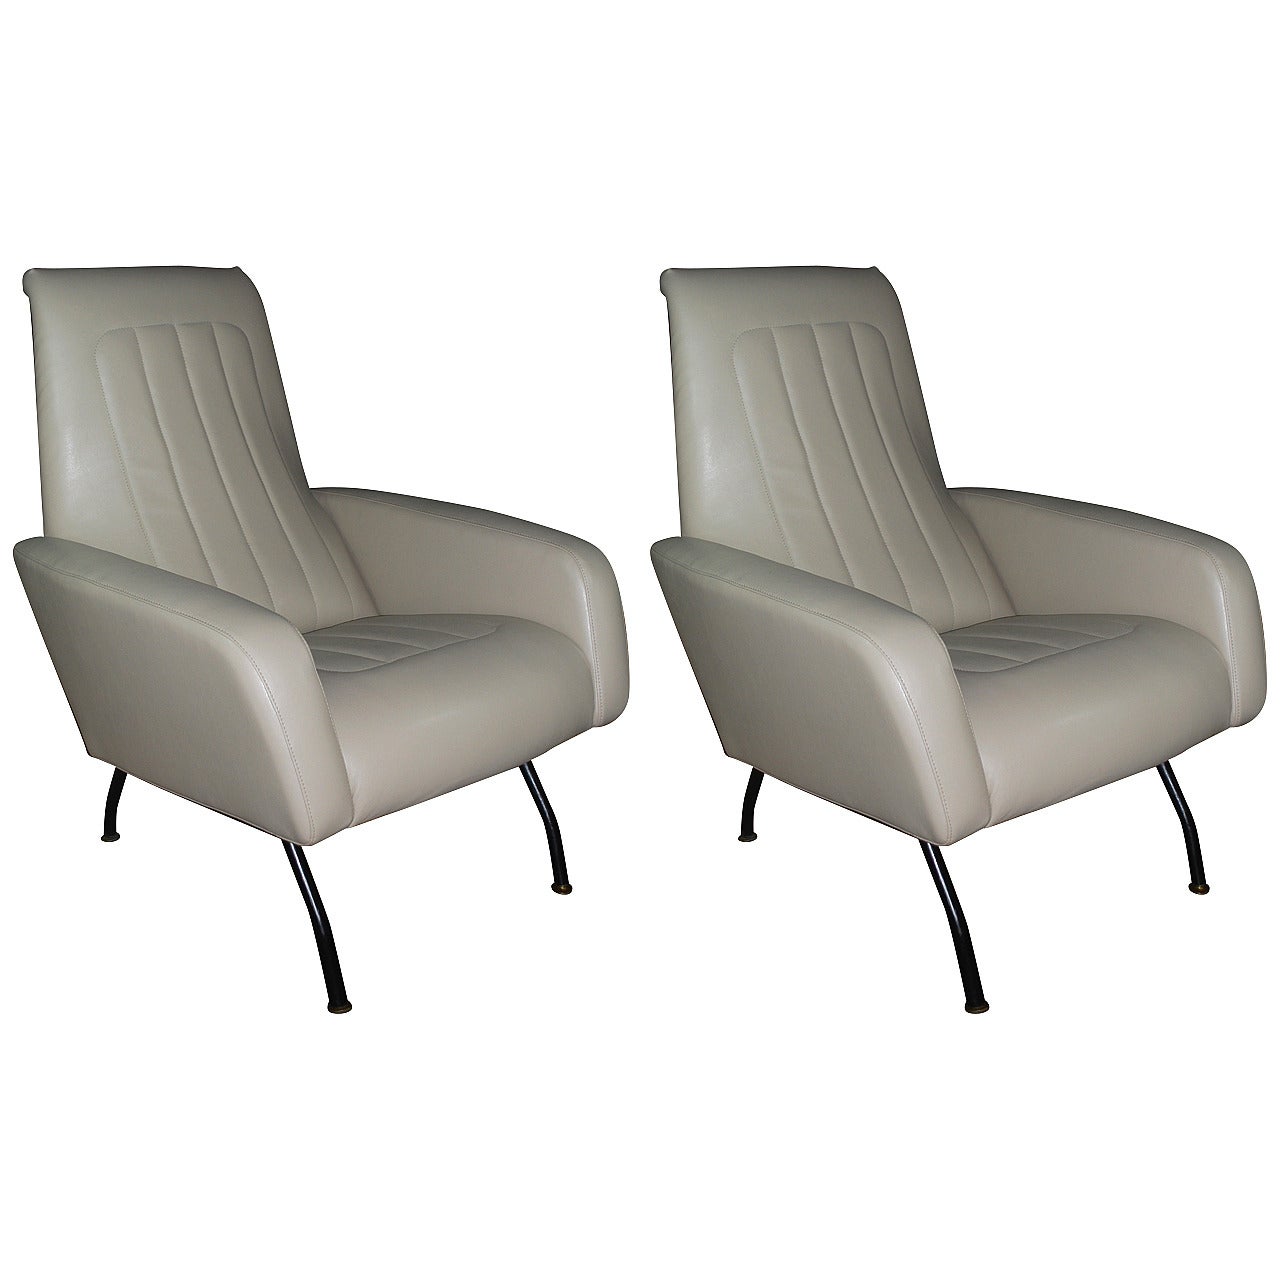 Pair of Gio Ponti Style Lounge Chairs For Sale